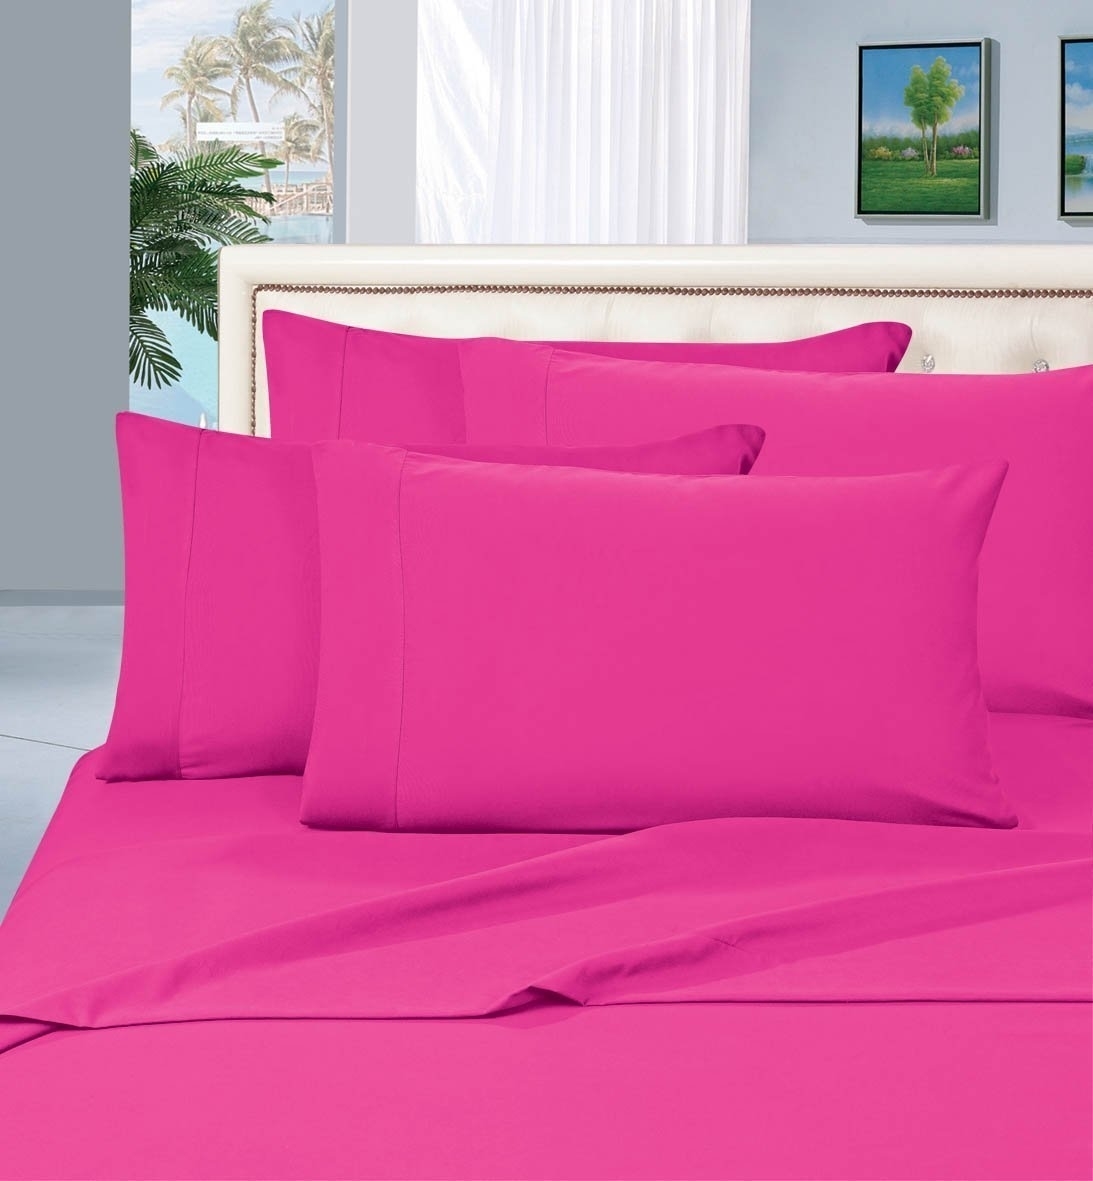 Elegant Comfort 1500 Series Wrinkle Resistant Egyptian Quality Hypoallergenic Ultra Soft Luxury 4-piece Sheet Set, California King, Hot Pink